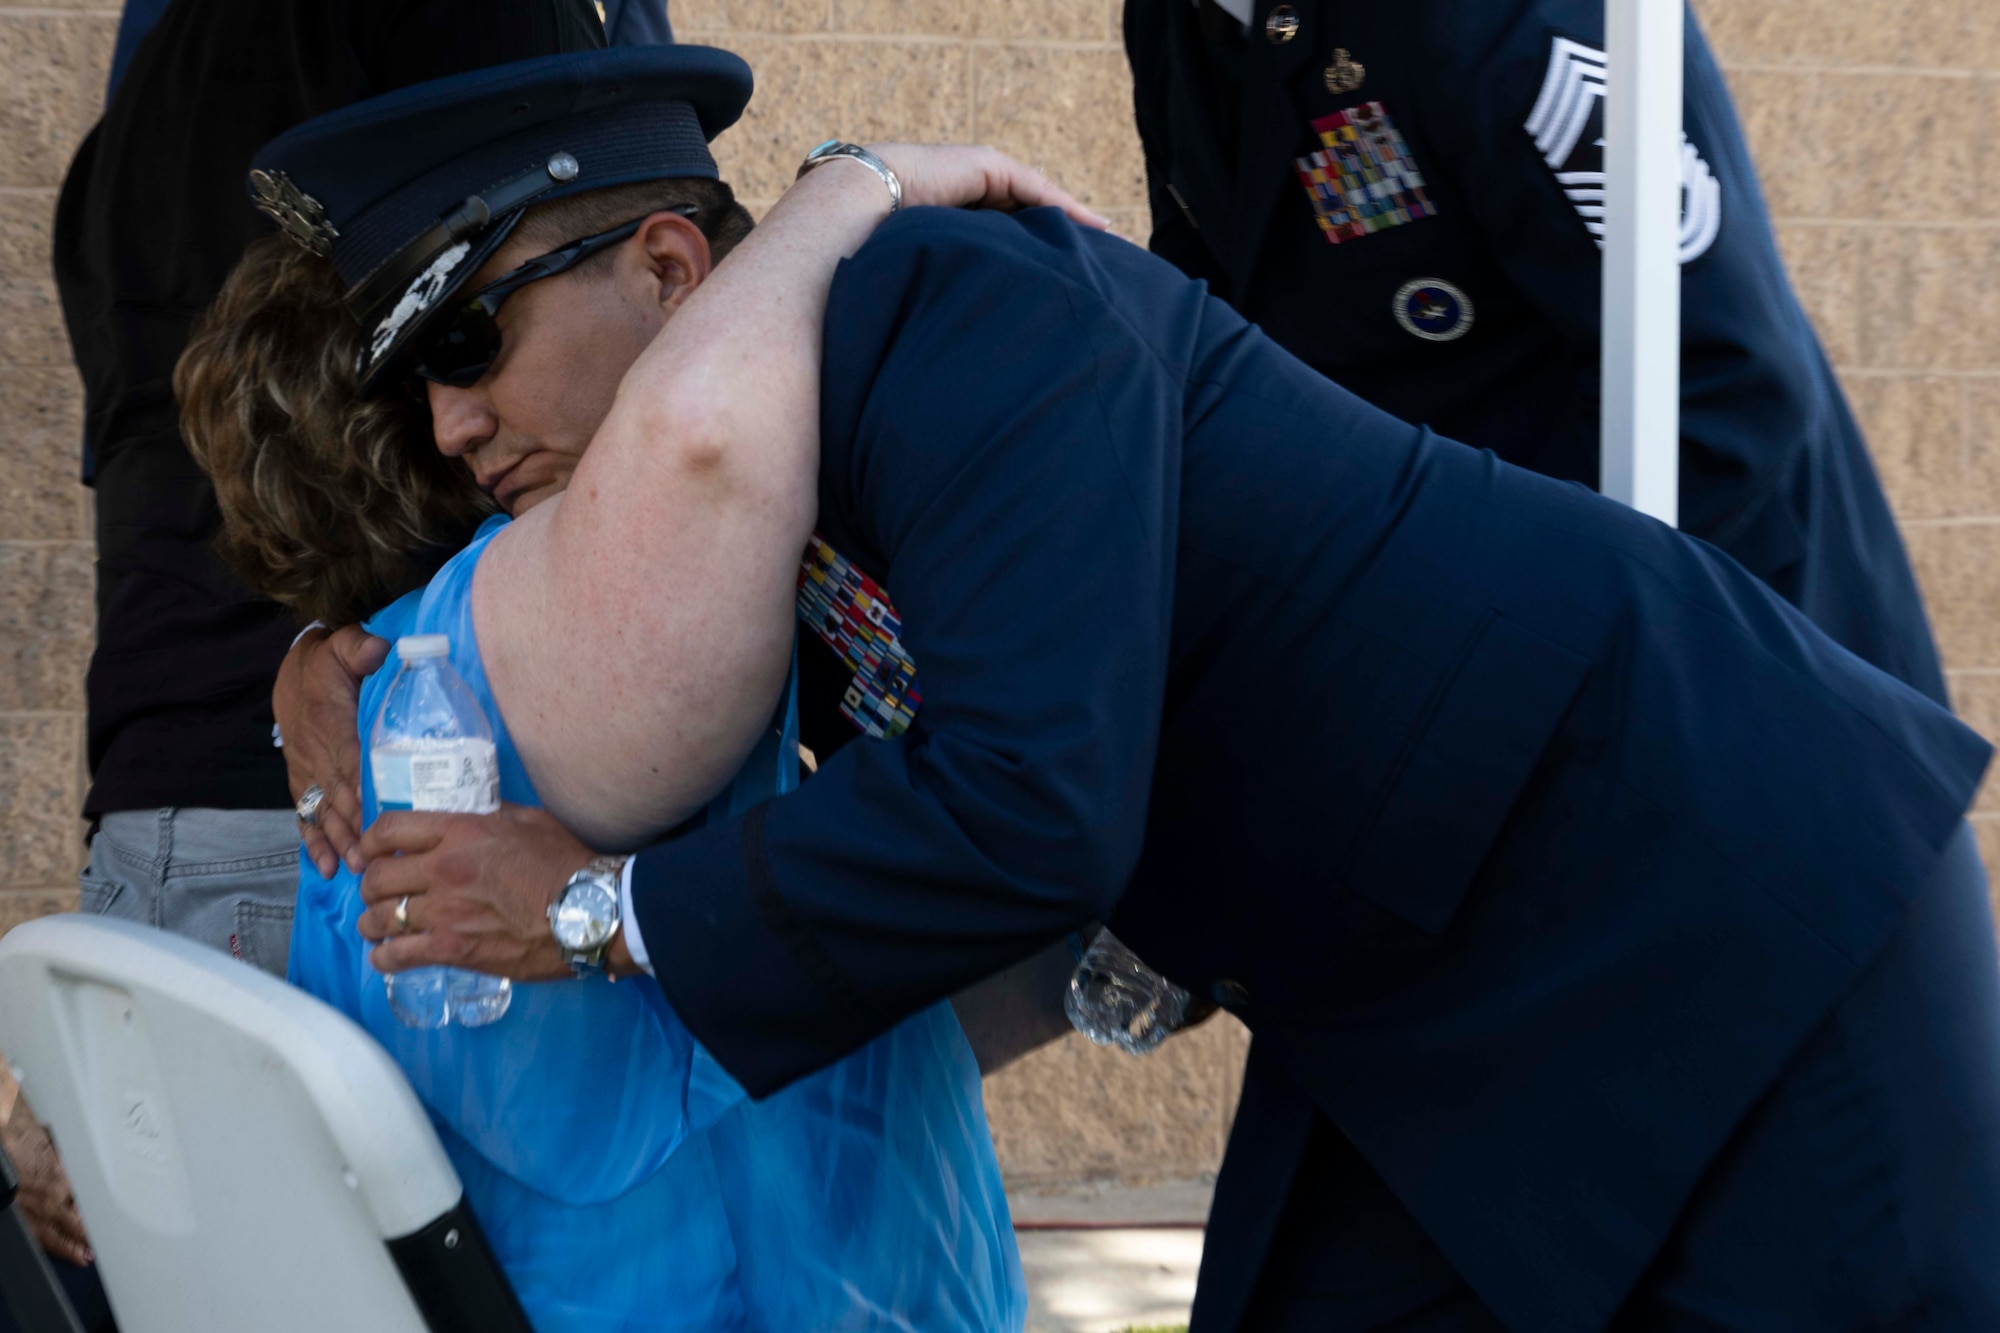 U.S. Air Force Col. Juan Alvarez, 49th Mission Support Group commander, hugs Susan Misener, Gold Star Mom to U.S. Marine Sgt. Garrett A. Misener, 2nd Battalion, 9th Marine Division, during a Memorial Day celebration, at Holloman Air Force Base, New Mexico, May 25, 2023. Holloman honors Gold Star Moms, who are mothers who lost sons or daughters of the United States of Armed Forces.  (U.S. Air Force photo by Airman 1st Class Michelle Ferrari)